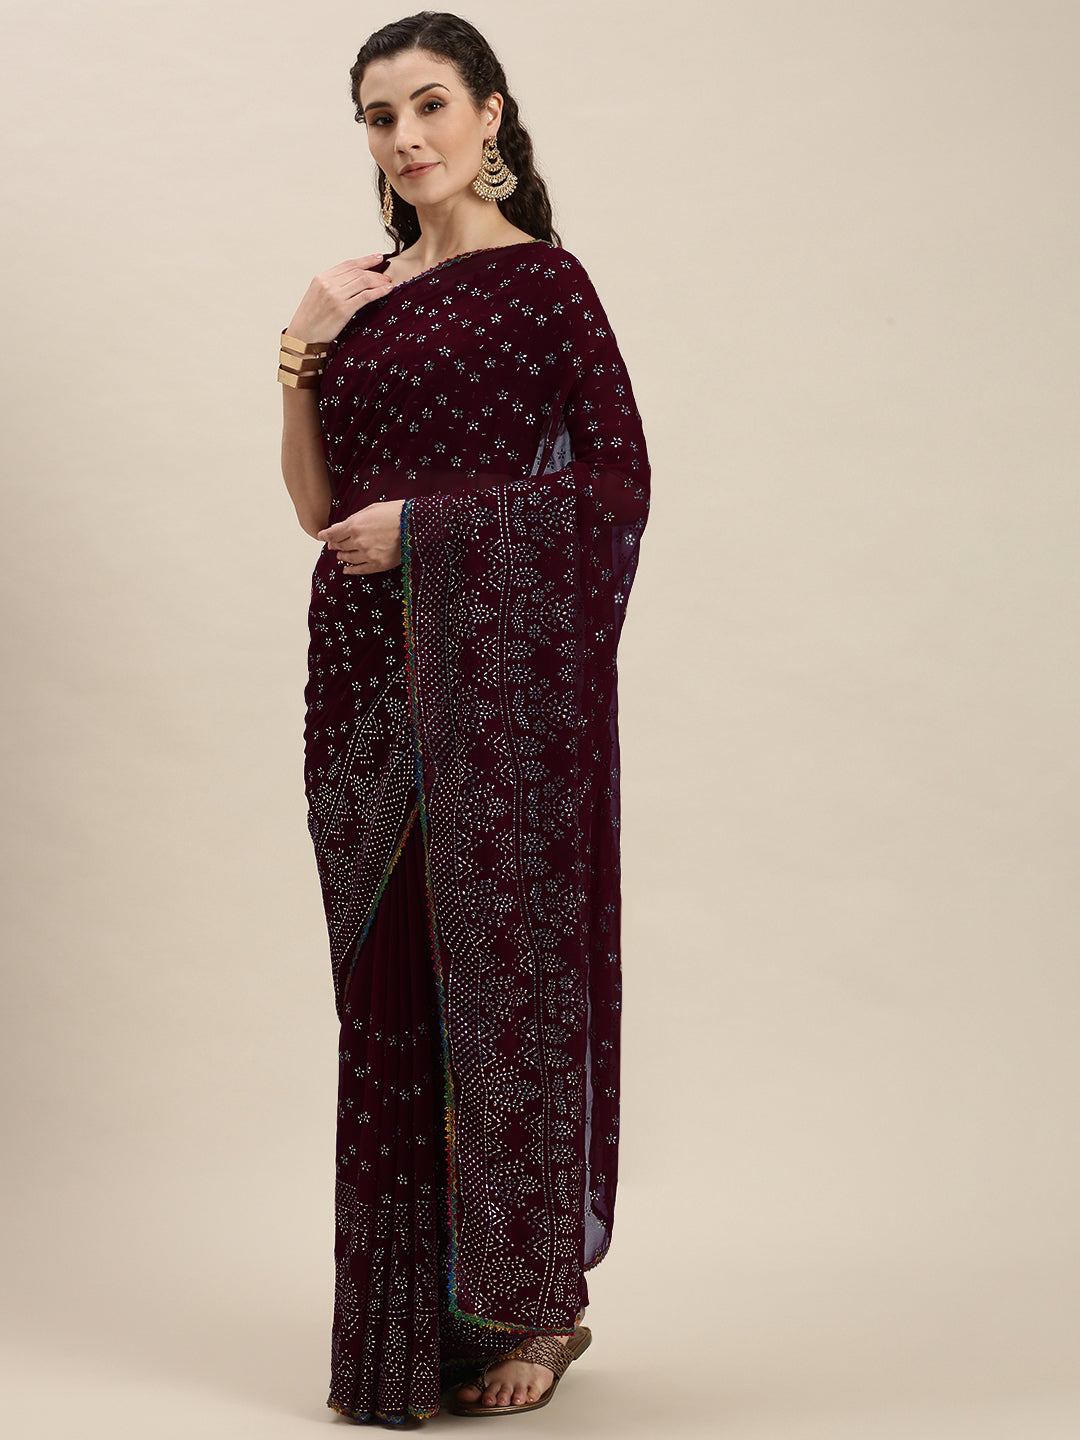 Awesome Purple Color Silver-Toned Beads Embroidered Saree